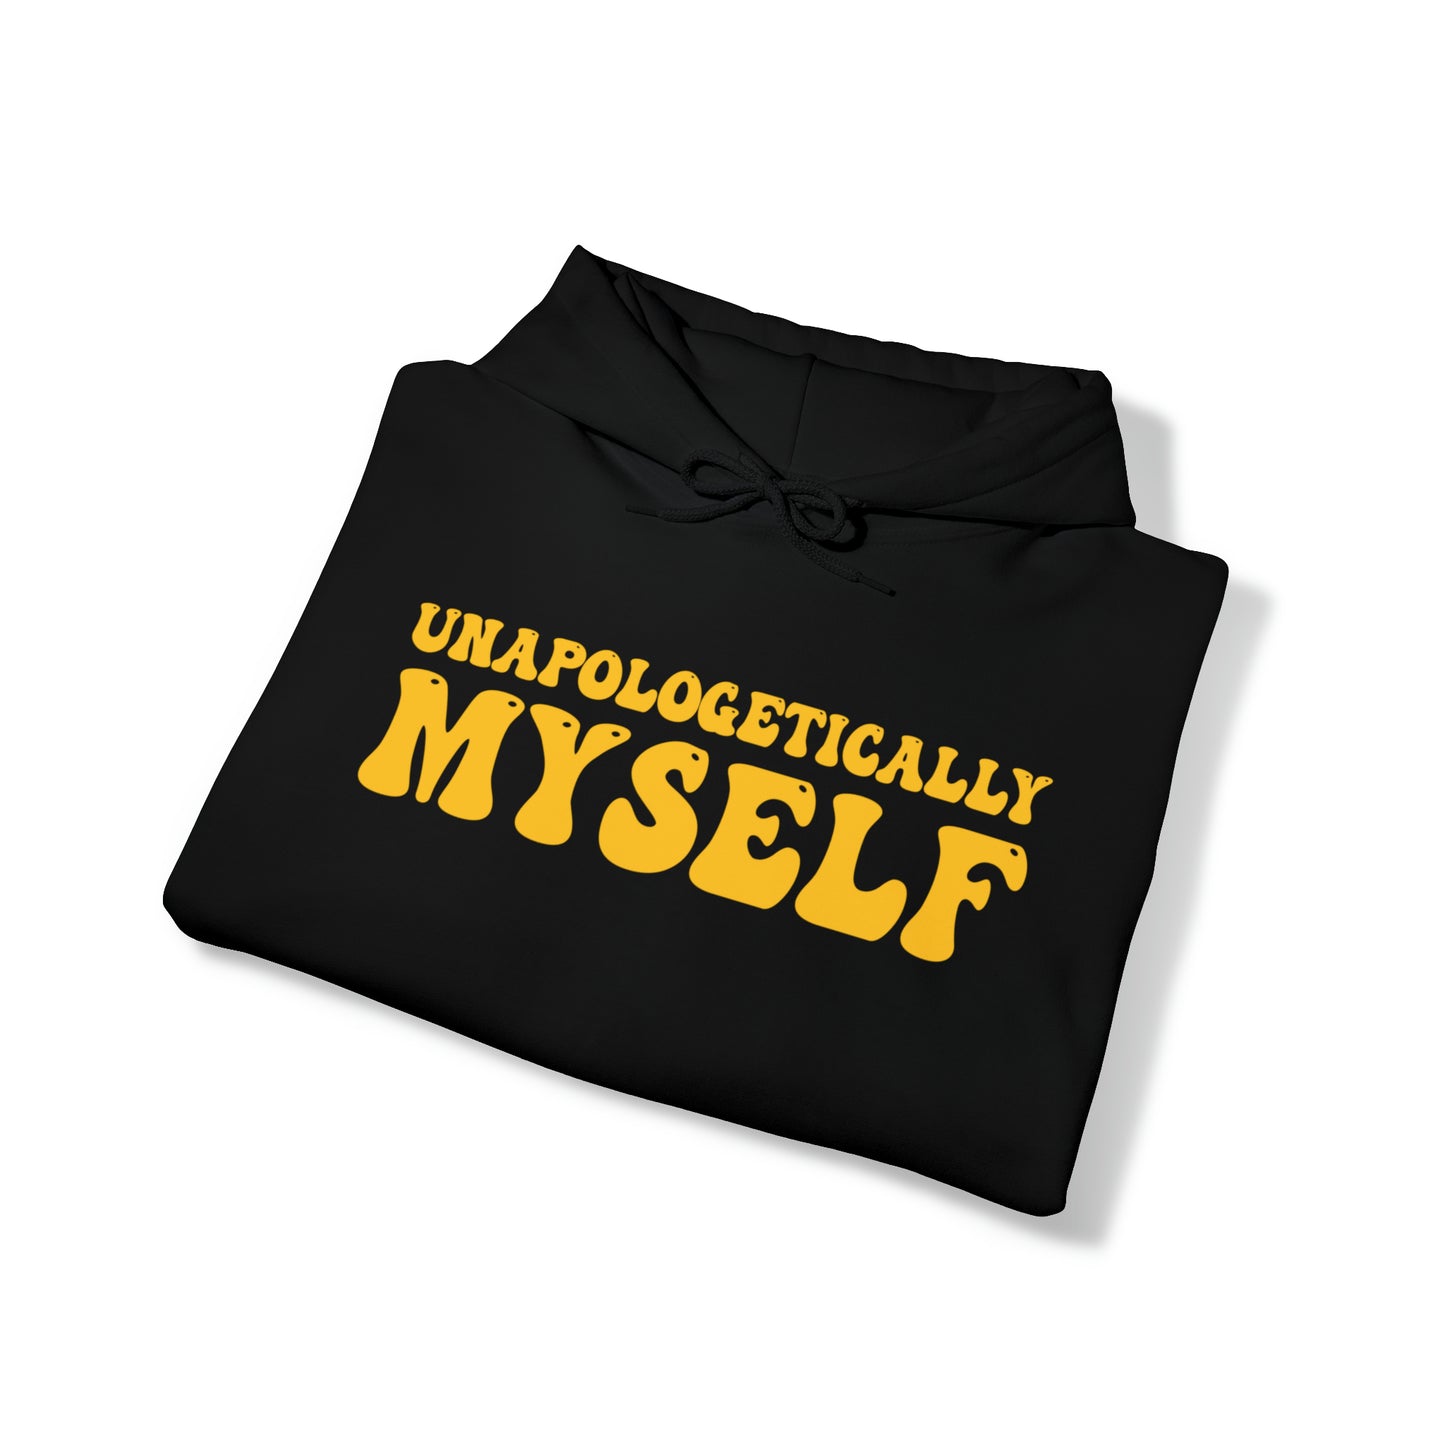 Michaleigh Vallimont: Unapologetically Myself Hoodie